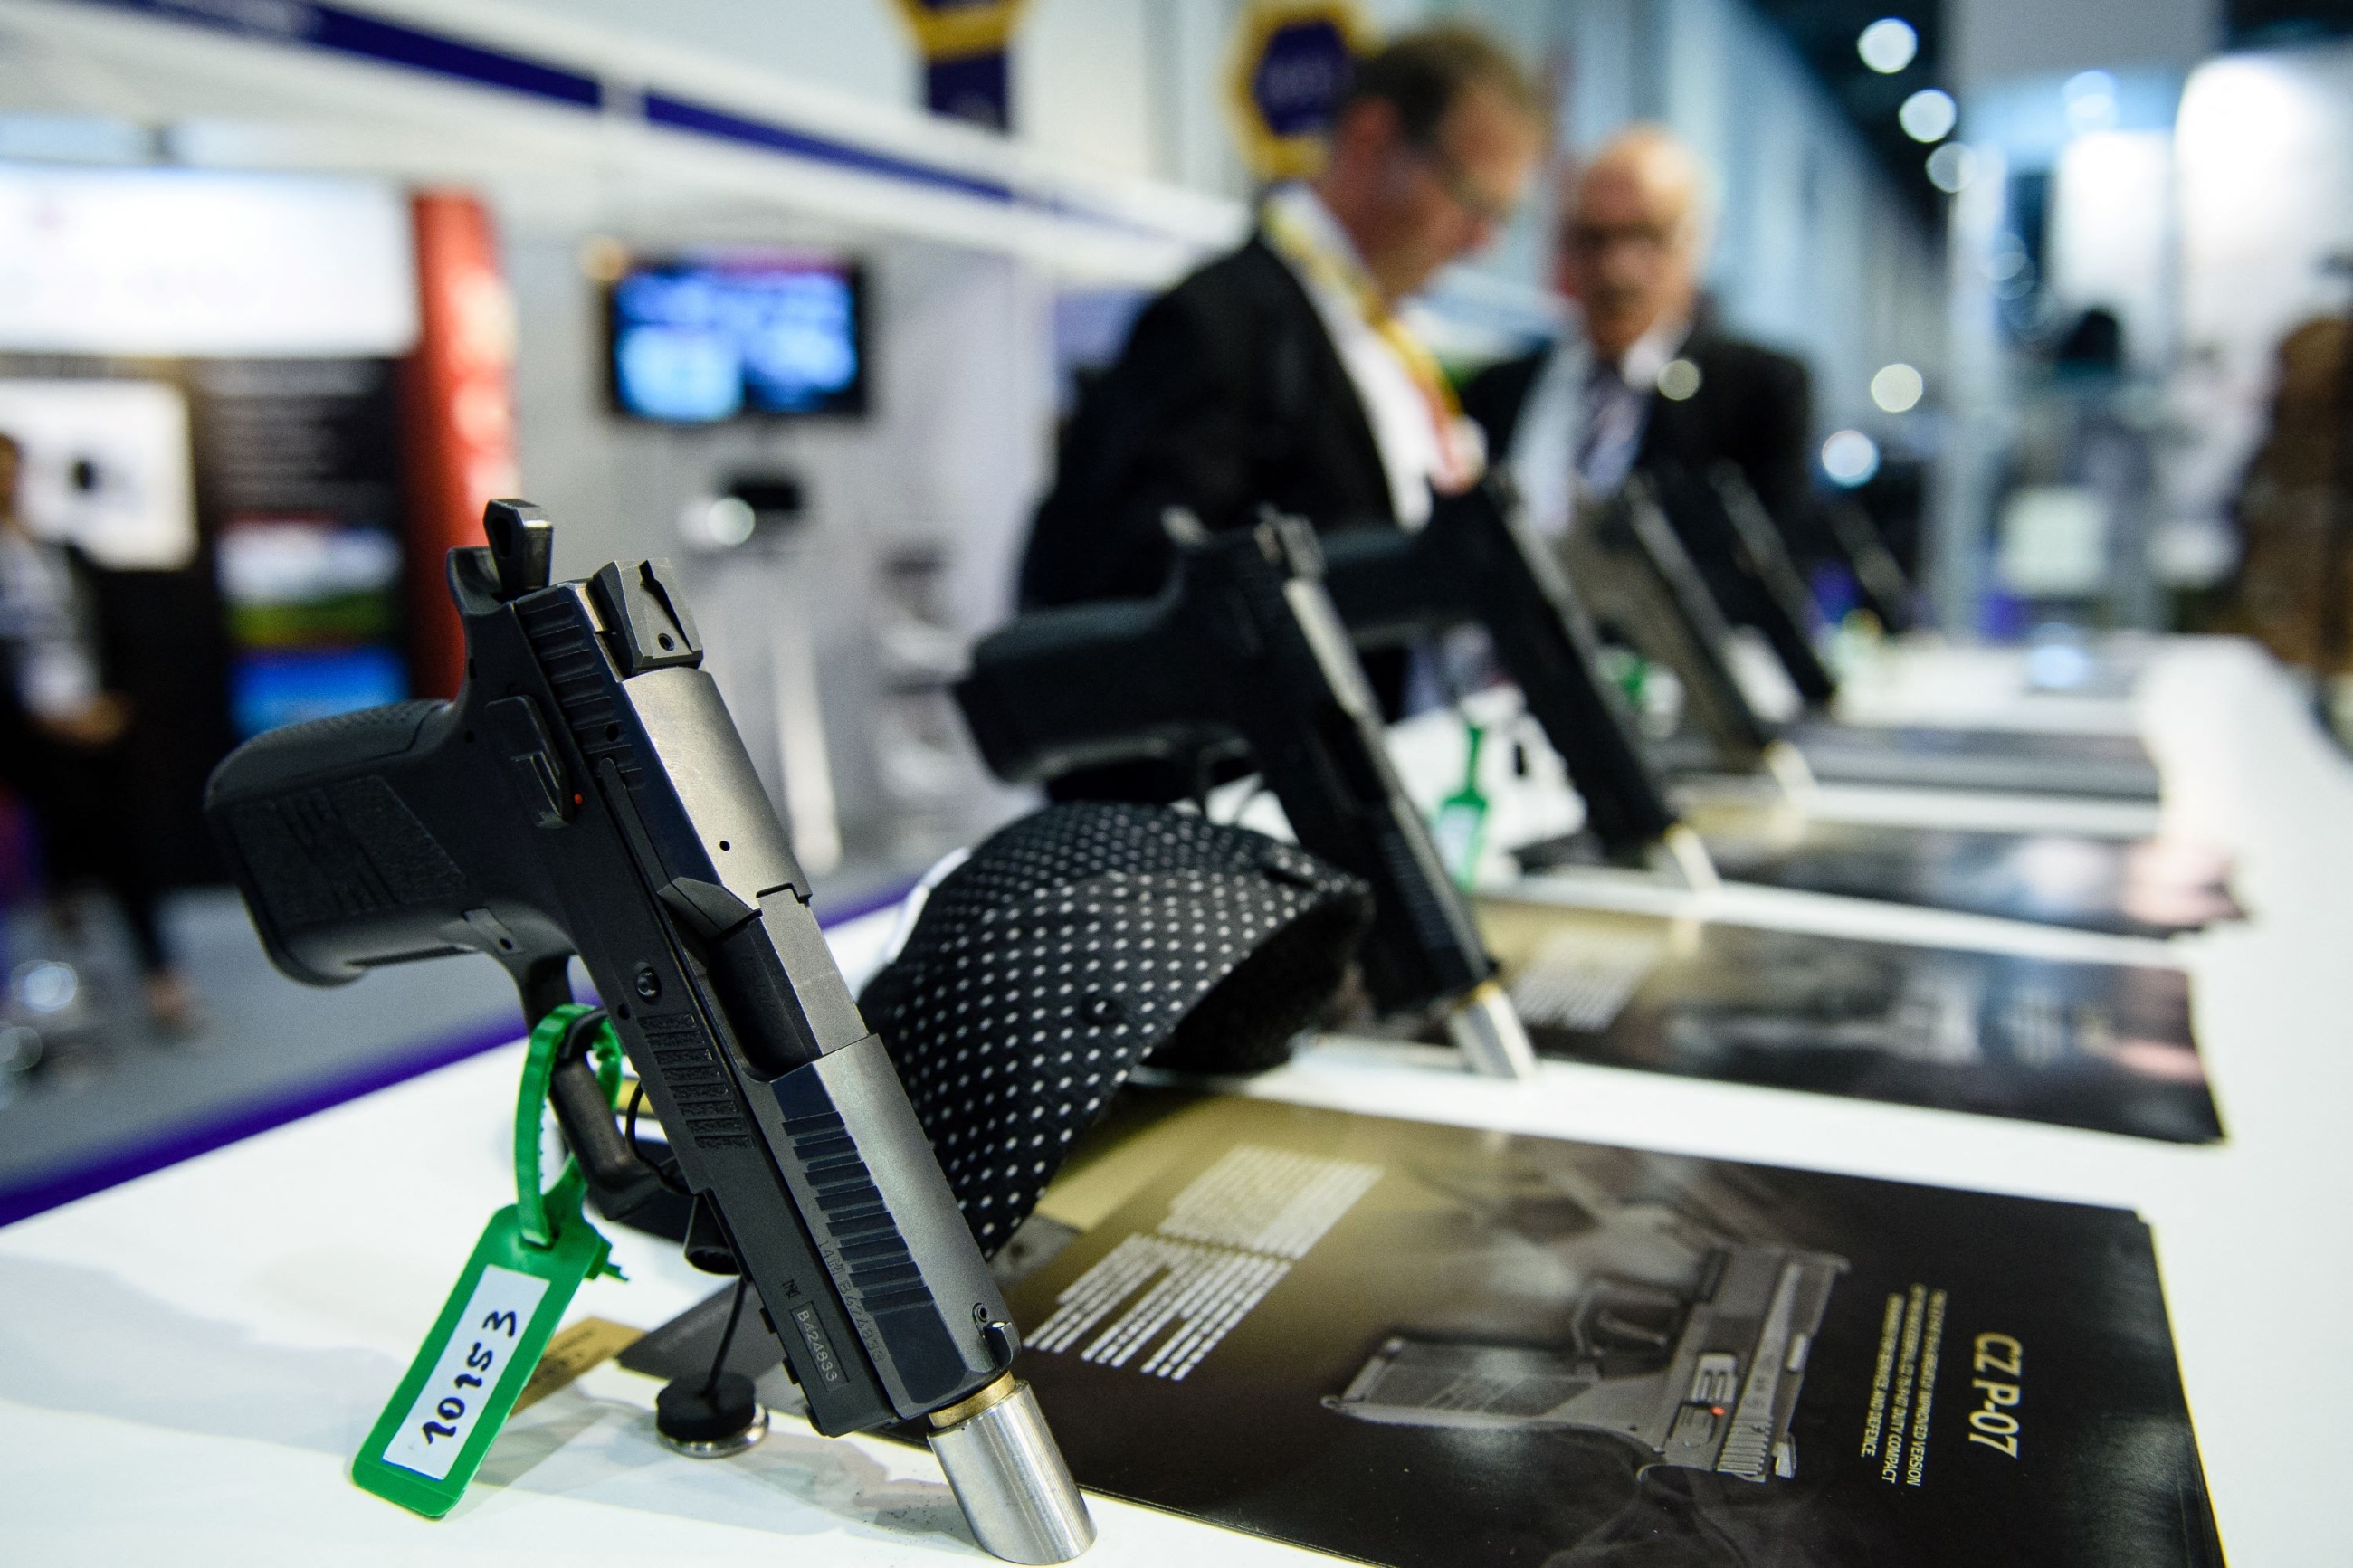 Handguns on display inside the ExCeL centre in London in September 2015 during the Defence and Security Equipment International (DSEI) exhibition